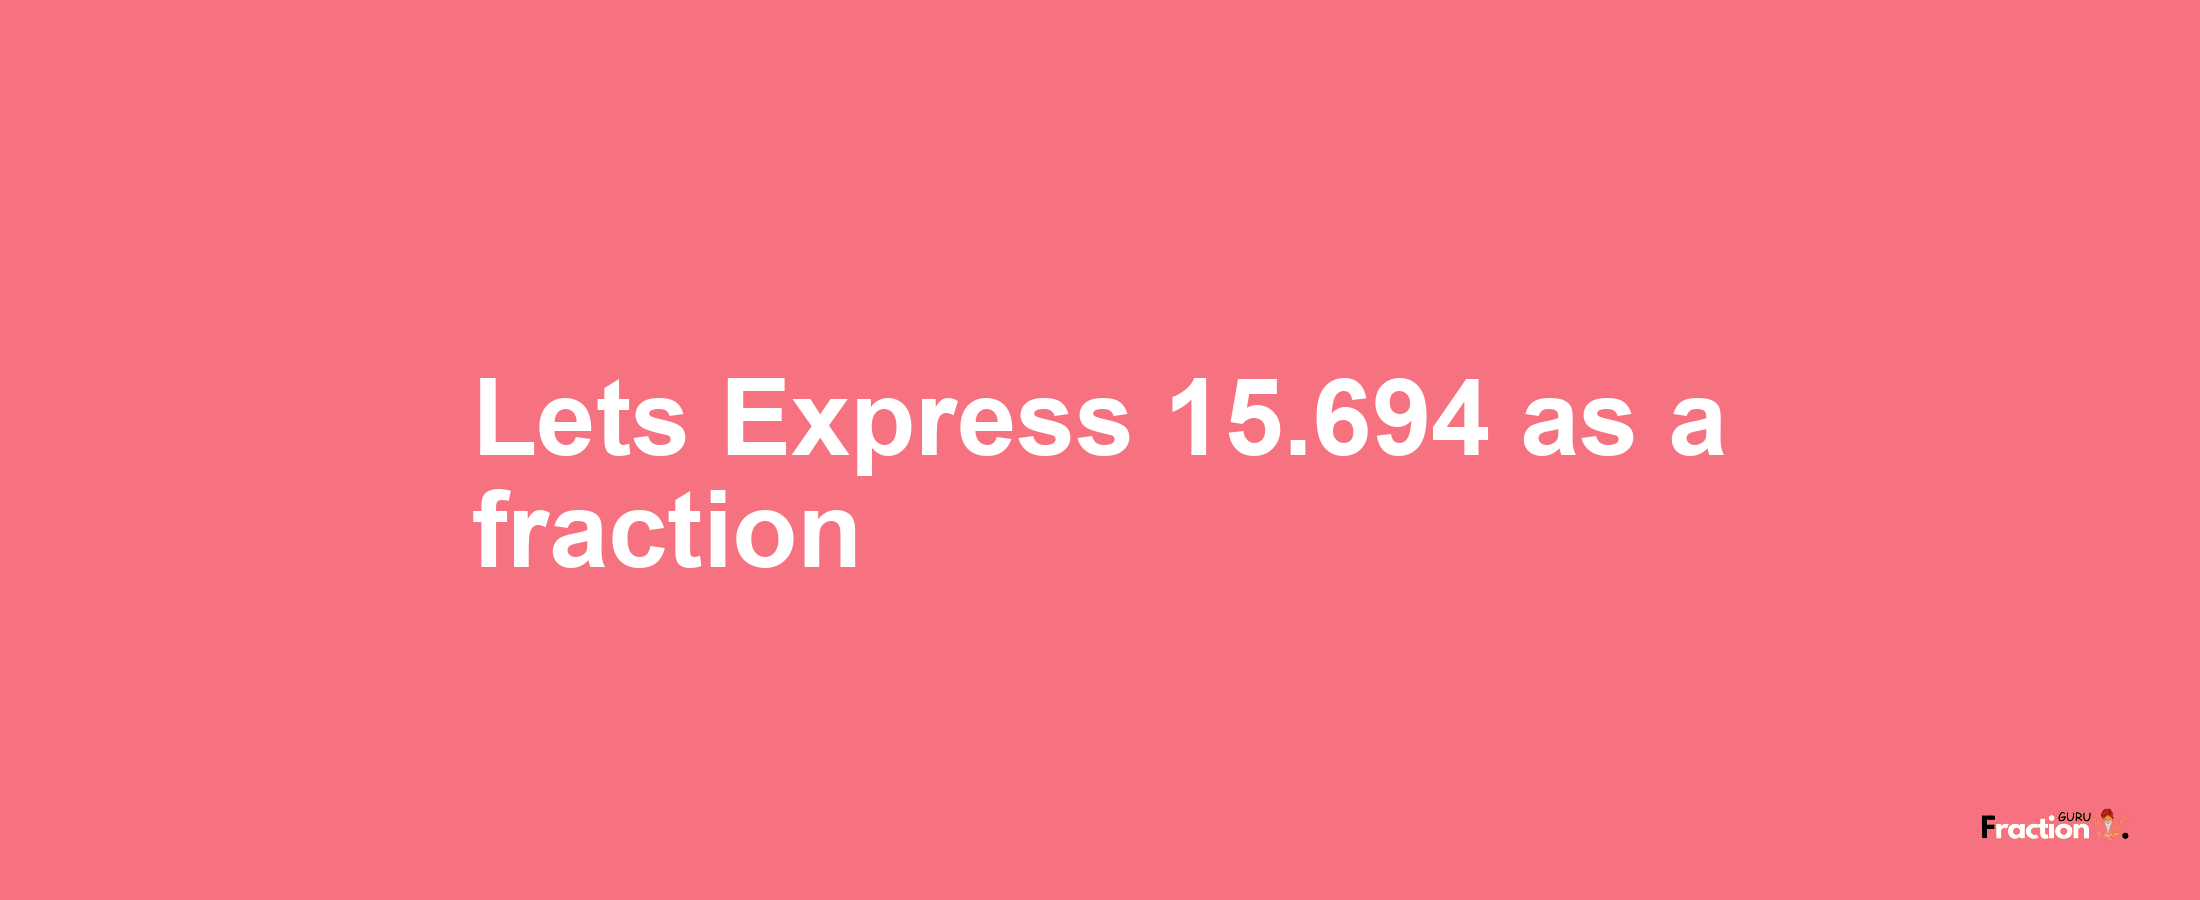 Lets Express 15.694 as afraction